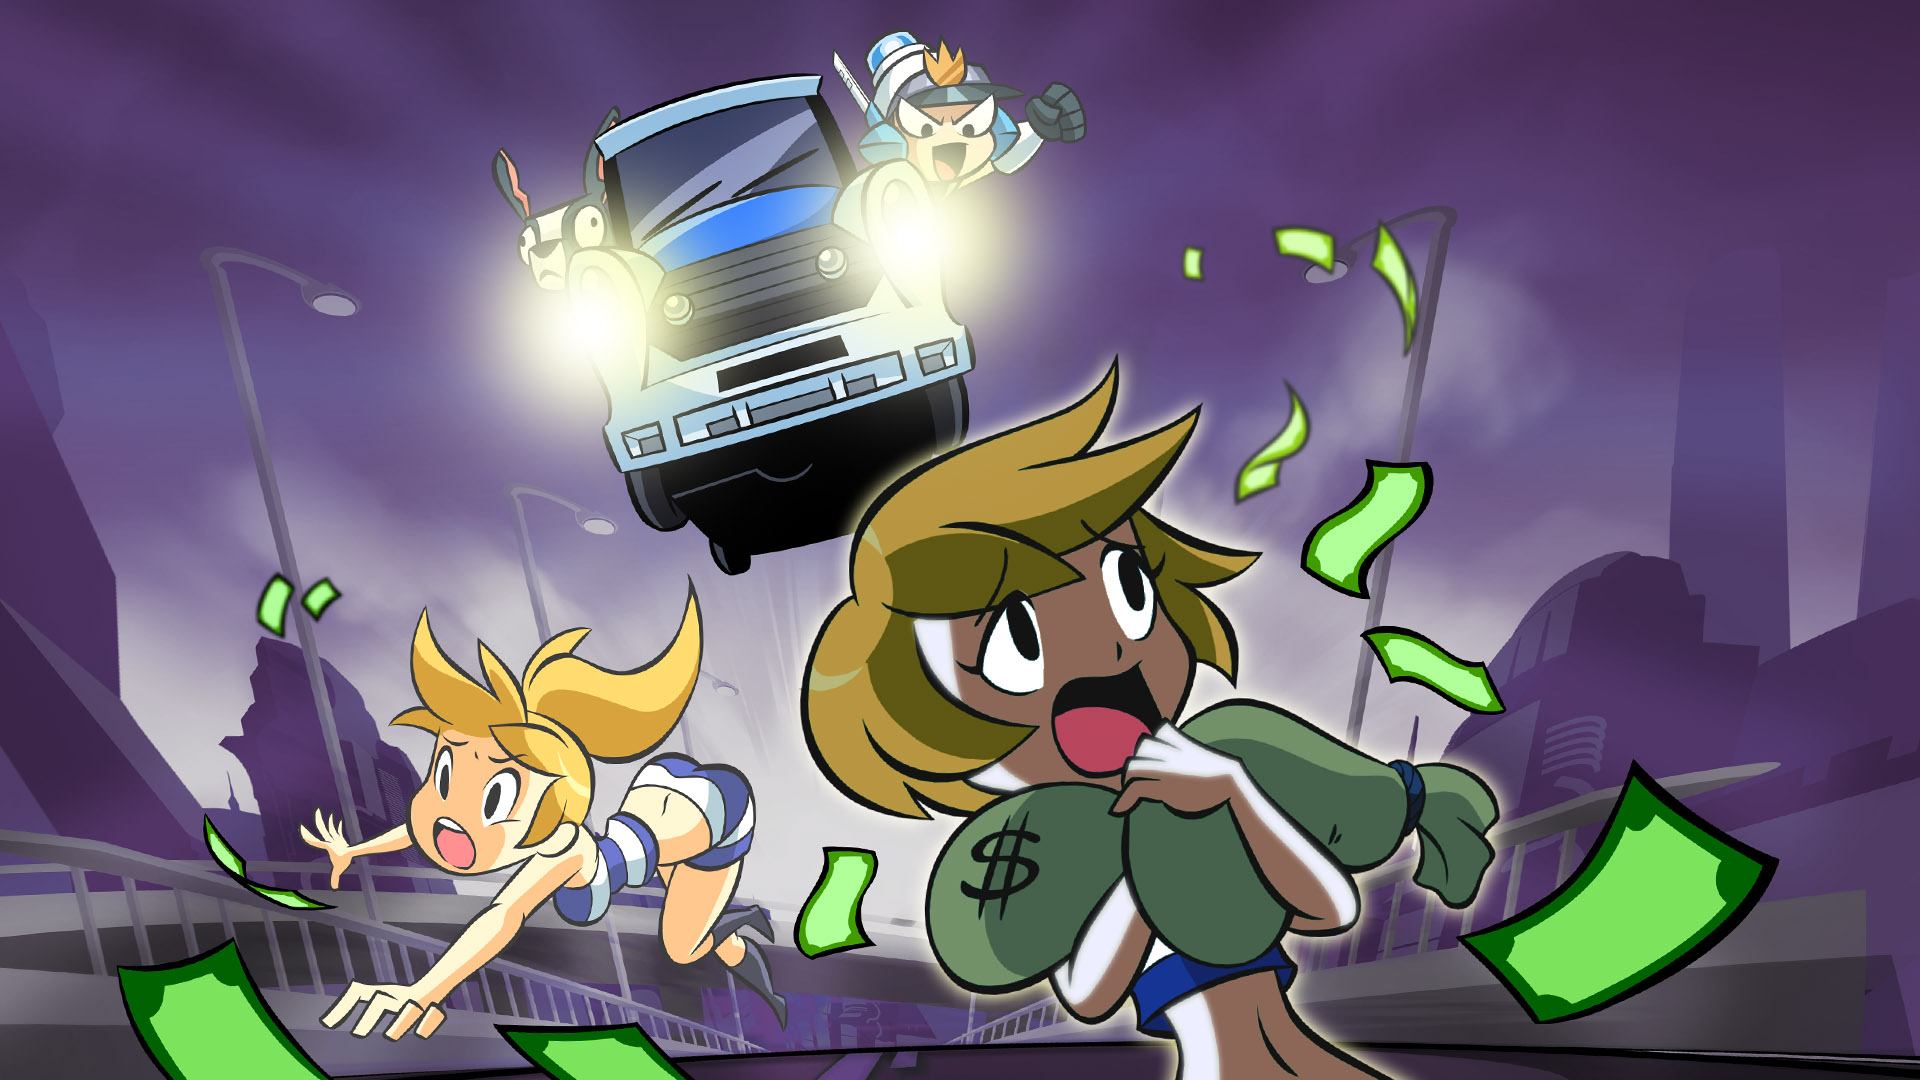 Mighty Switch Force! Hyper Drive Edition Backgrounds, Compatible - PC, Mobile, Gadgets| 1920x1080 px